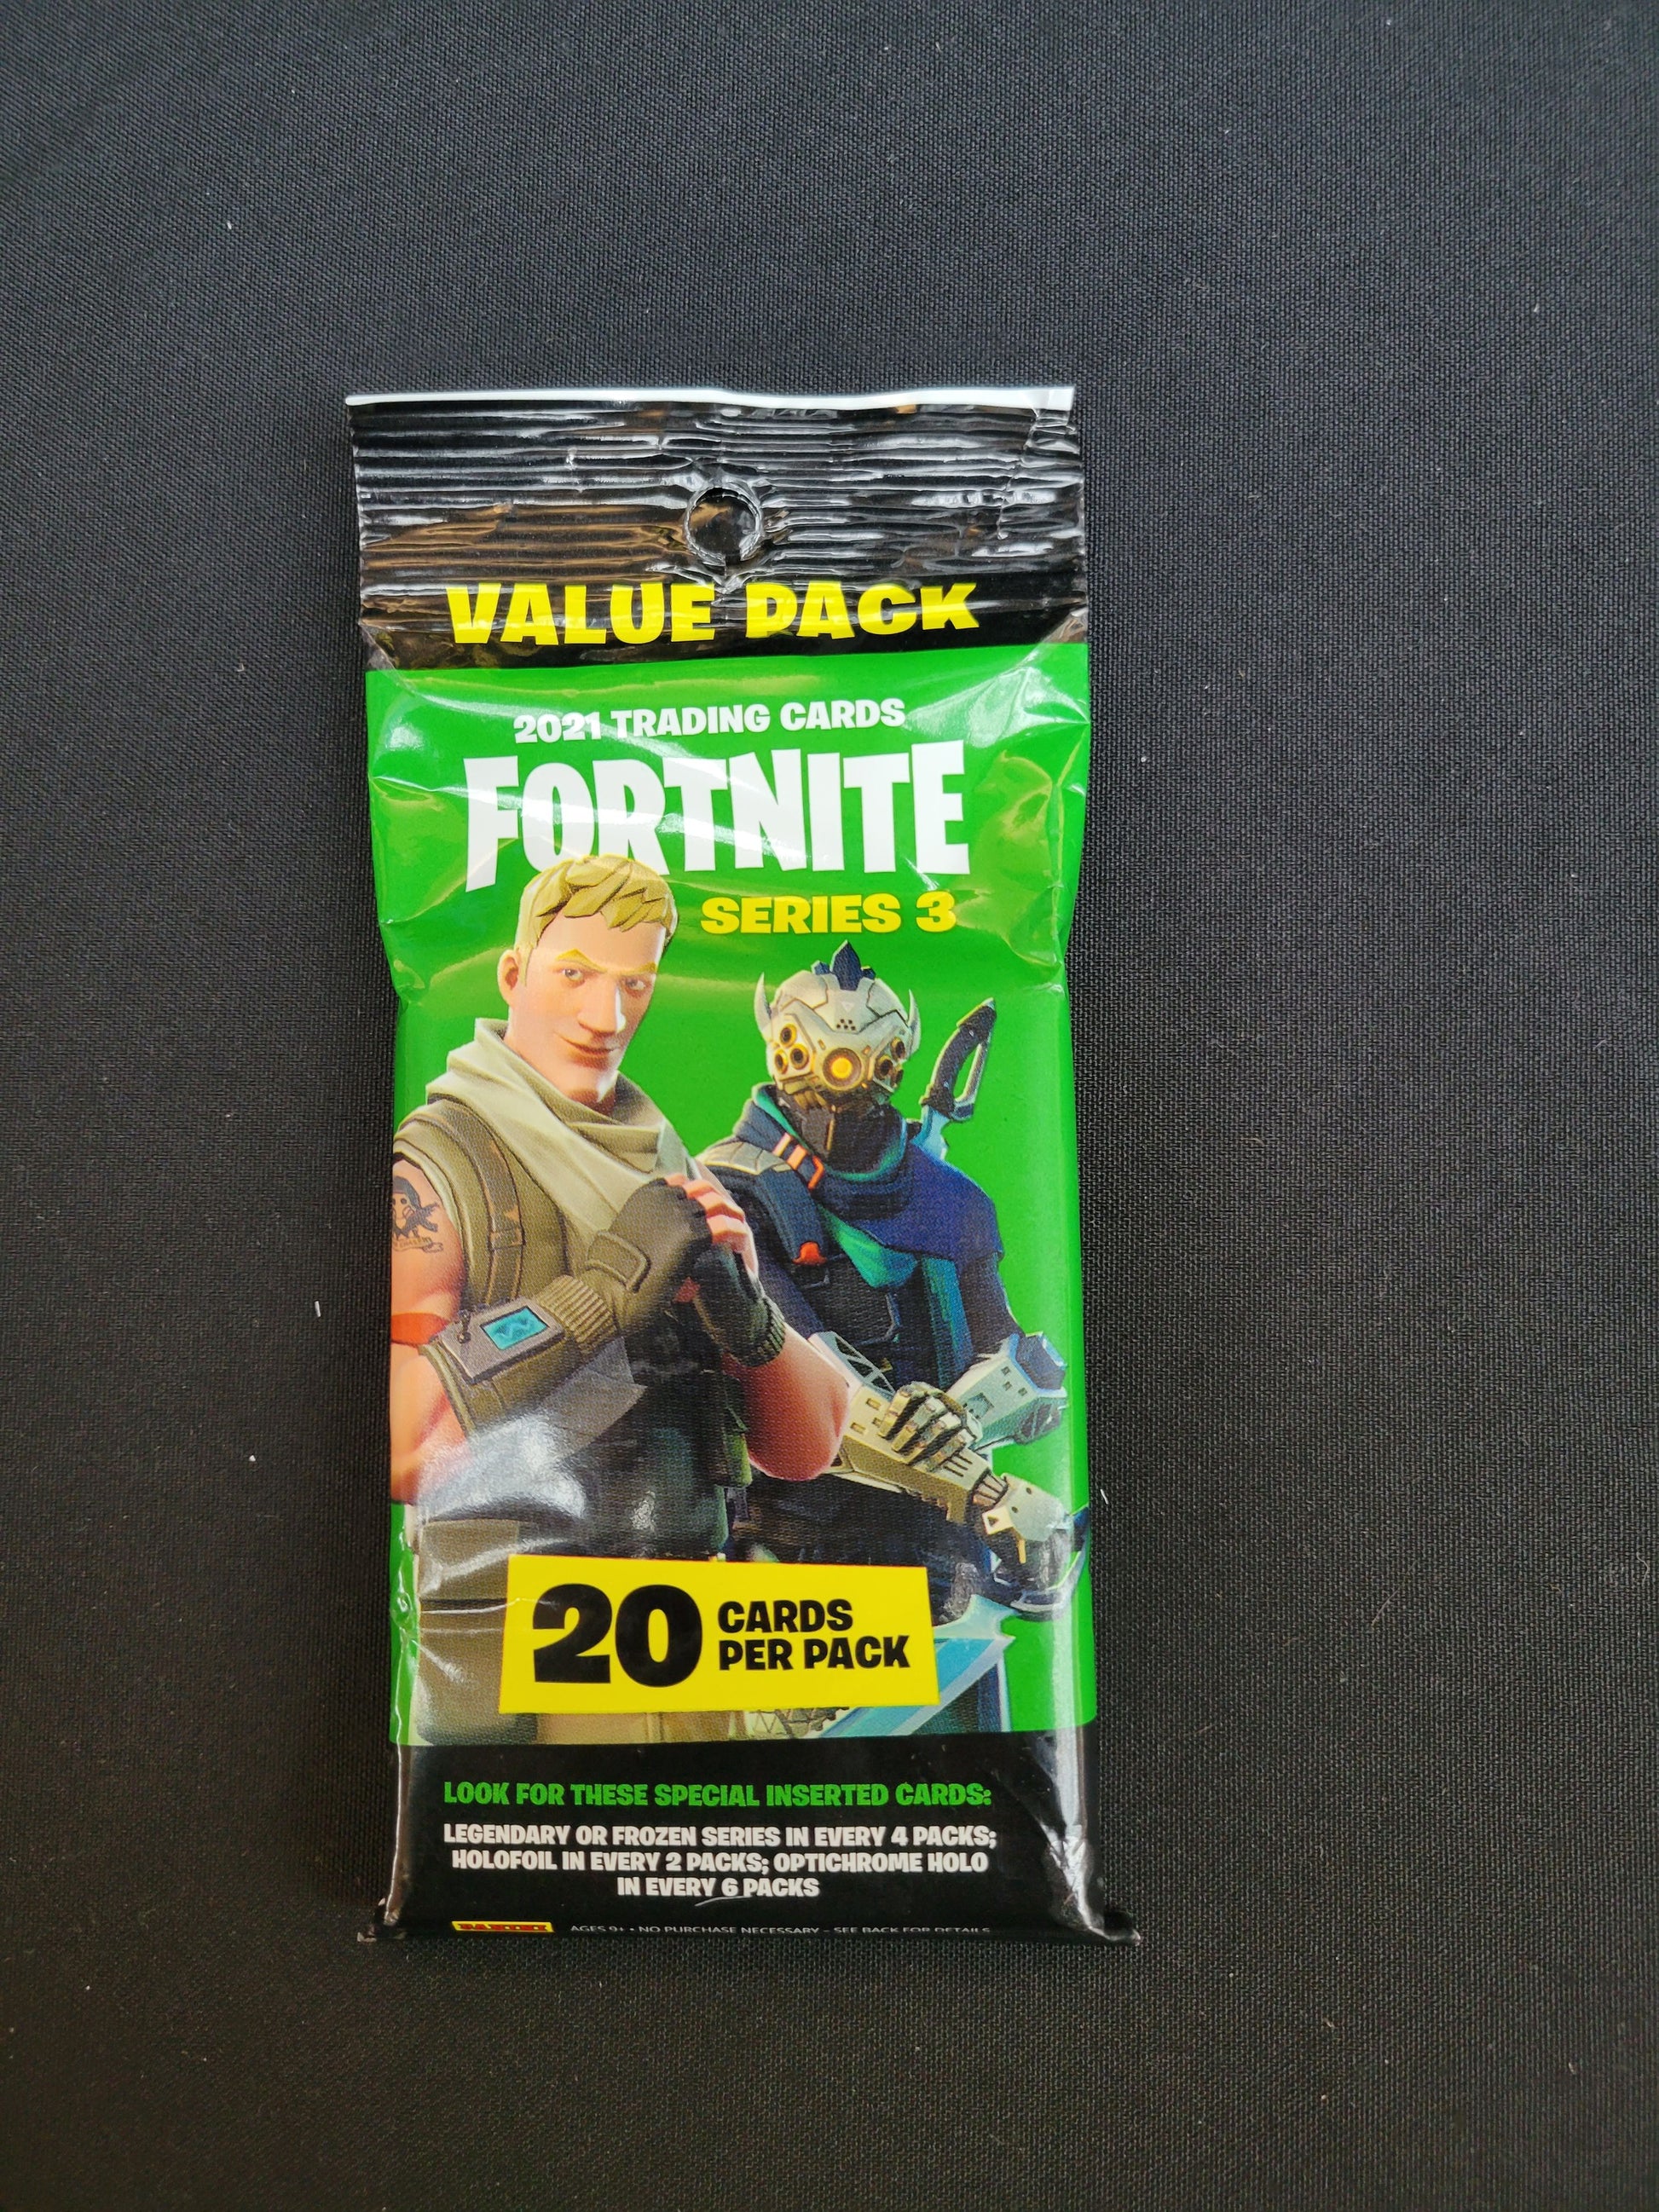 20 cards per pack. Look for Legendary, Frozen Series, Holofoil, and Optichrome Holo insert cards.  New for series 3: Wrap cards show 35 cards with a different wrap on the front and back.  Find 232 new Outfits -- including 23 Legendary and 9 from the Frozen Series.  Look for revamped Outfit and Harvesting Tool card designs with 65 double-sided cards to collect.